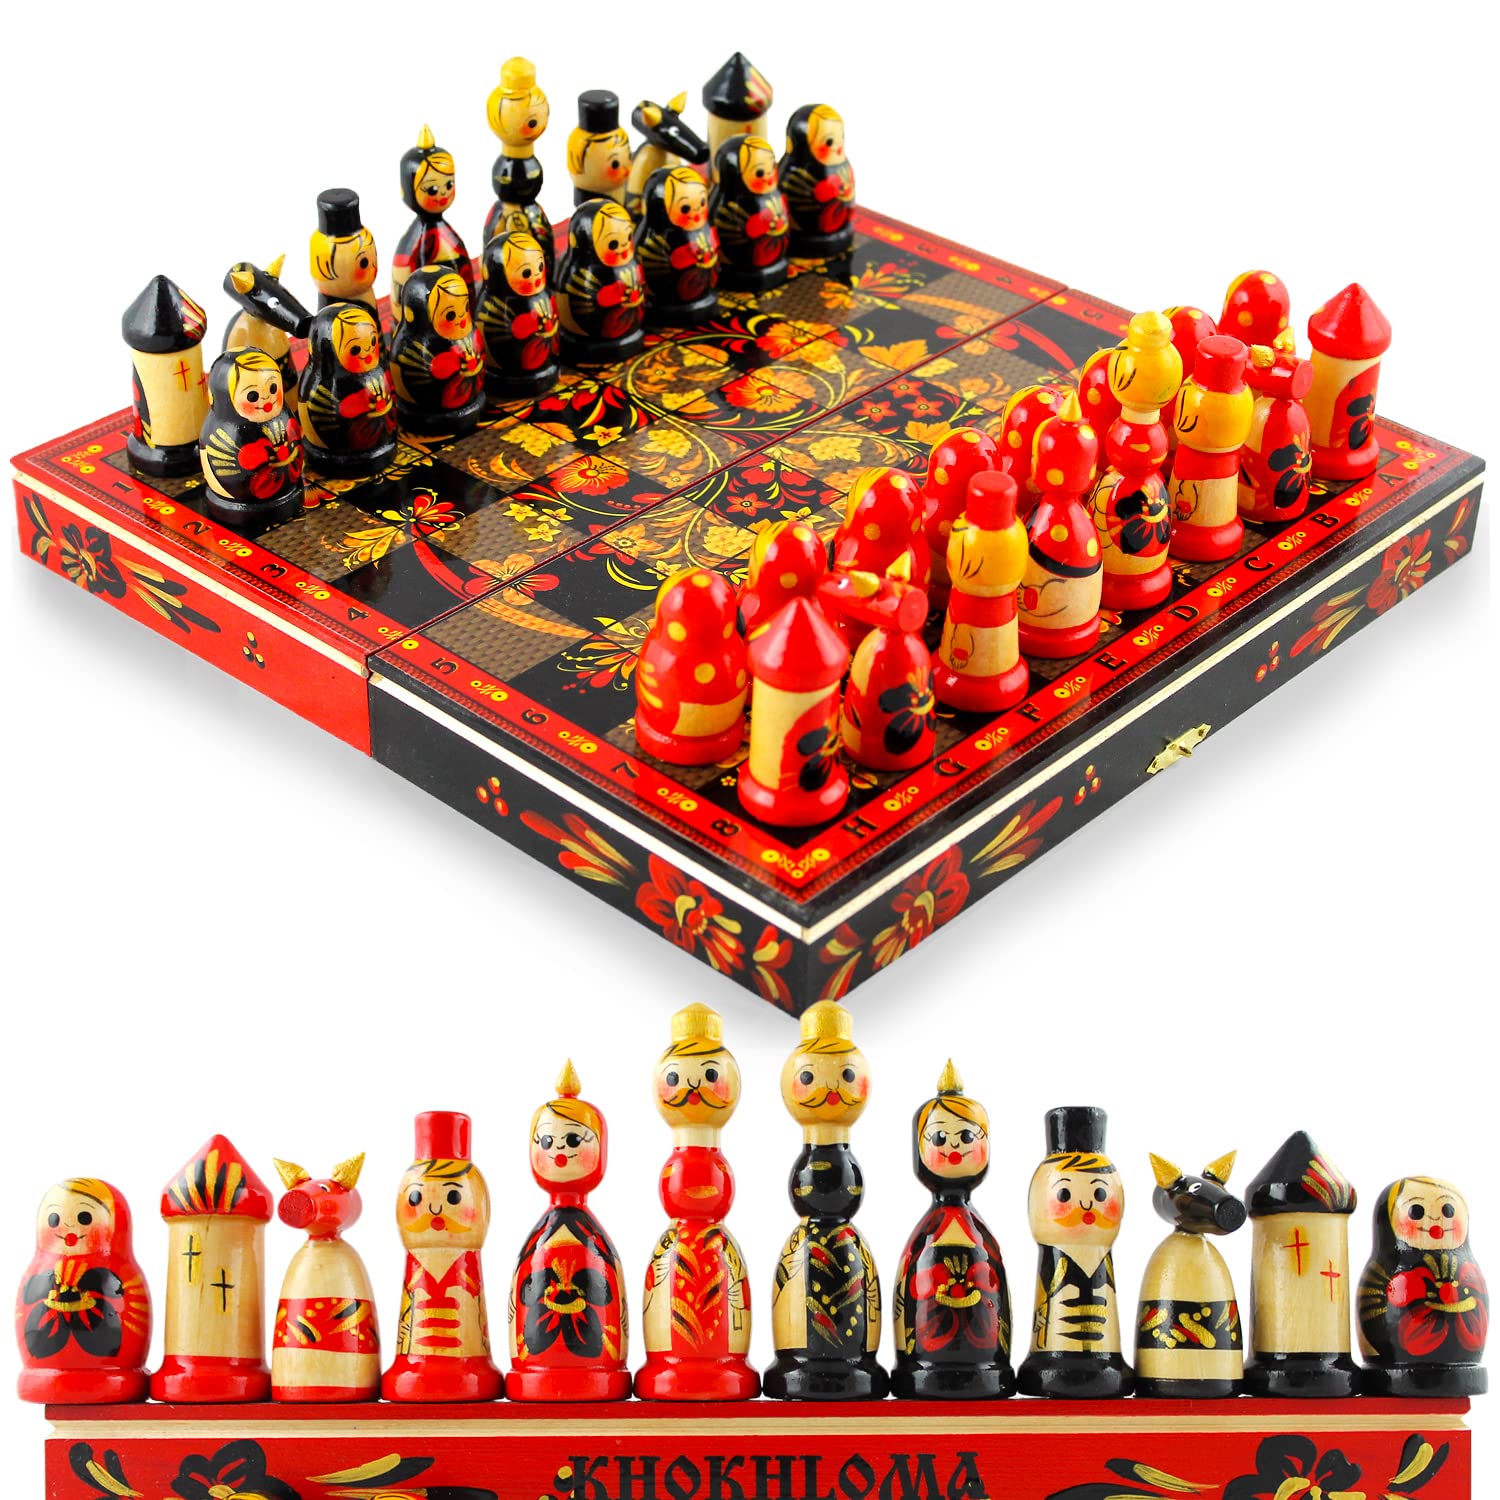 Souvenir Chess Set Russian Folk Art Khokhloma - Handcrafted Chess Pieces as Matryoshka Dolls - Unique Chess Sets - Family Board Games - Chess Gifts